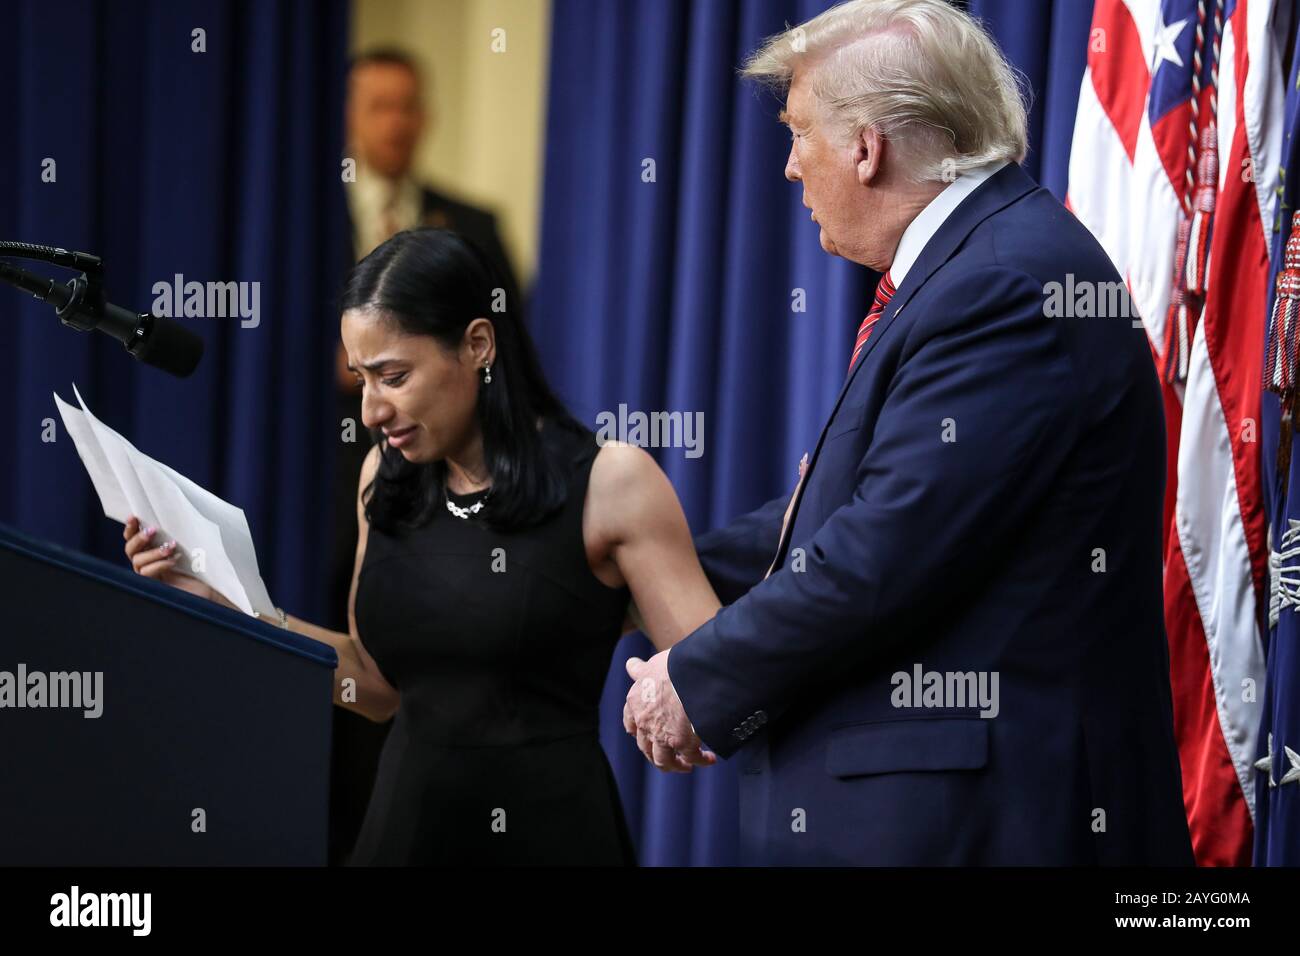 Washington DC, USA. 15th Feb 2020. President Donald Trump tries to comfort Daria Ortiz who recounted the death of her grandmother, allegedly by a man who was living in the country without legal permission, speaks, during a speech to members of the National Border Patrol Council in the South Court Auditorium at the Eisenhower Executive Office Building on the White House complex on February 14, 2020 in Washington, DC. (Photo by Oliver Contreras/SIPA USA) Credit: Sipa USA/Alamy Live News Stock Photo